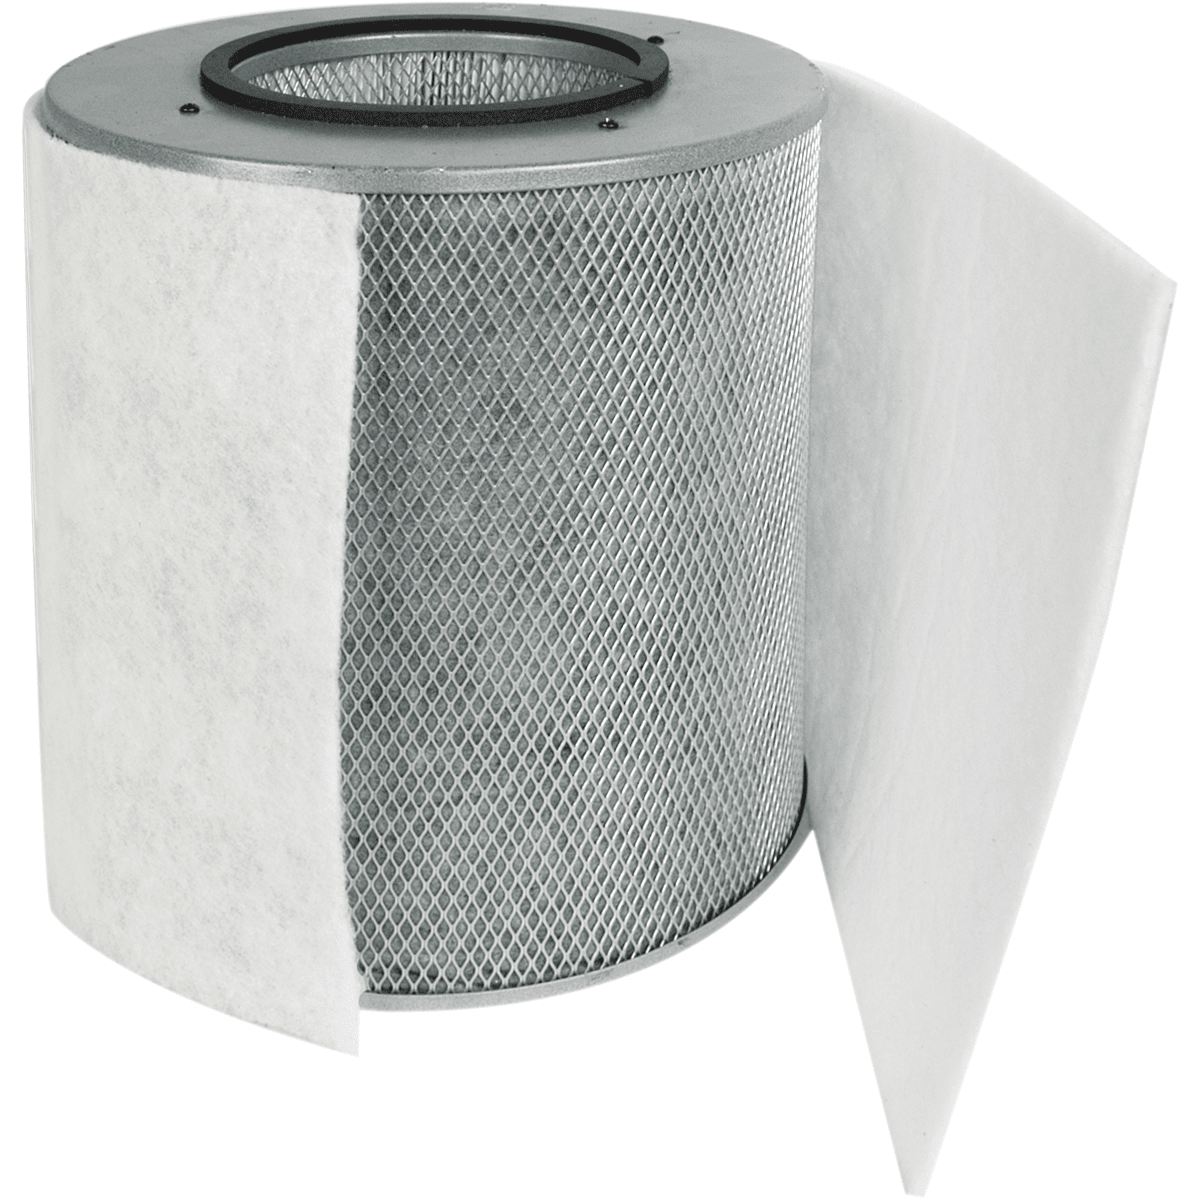 Austin Air Healthmate Jr Replacement Filter w/ Prefilter (Light-colored)